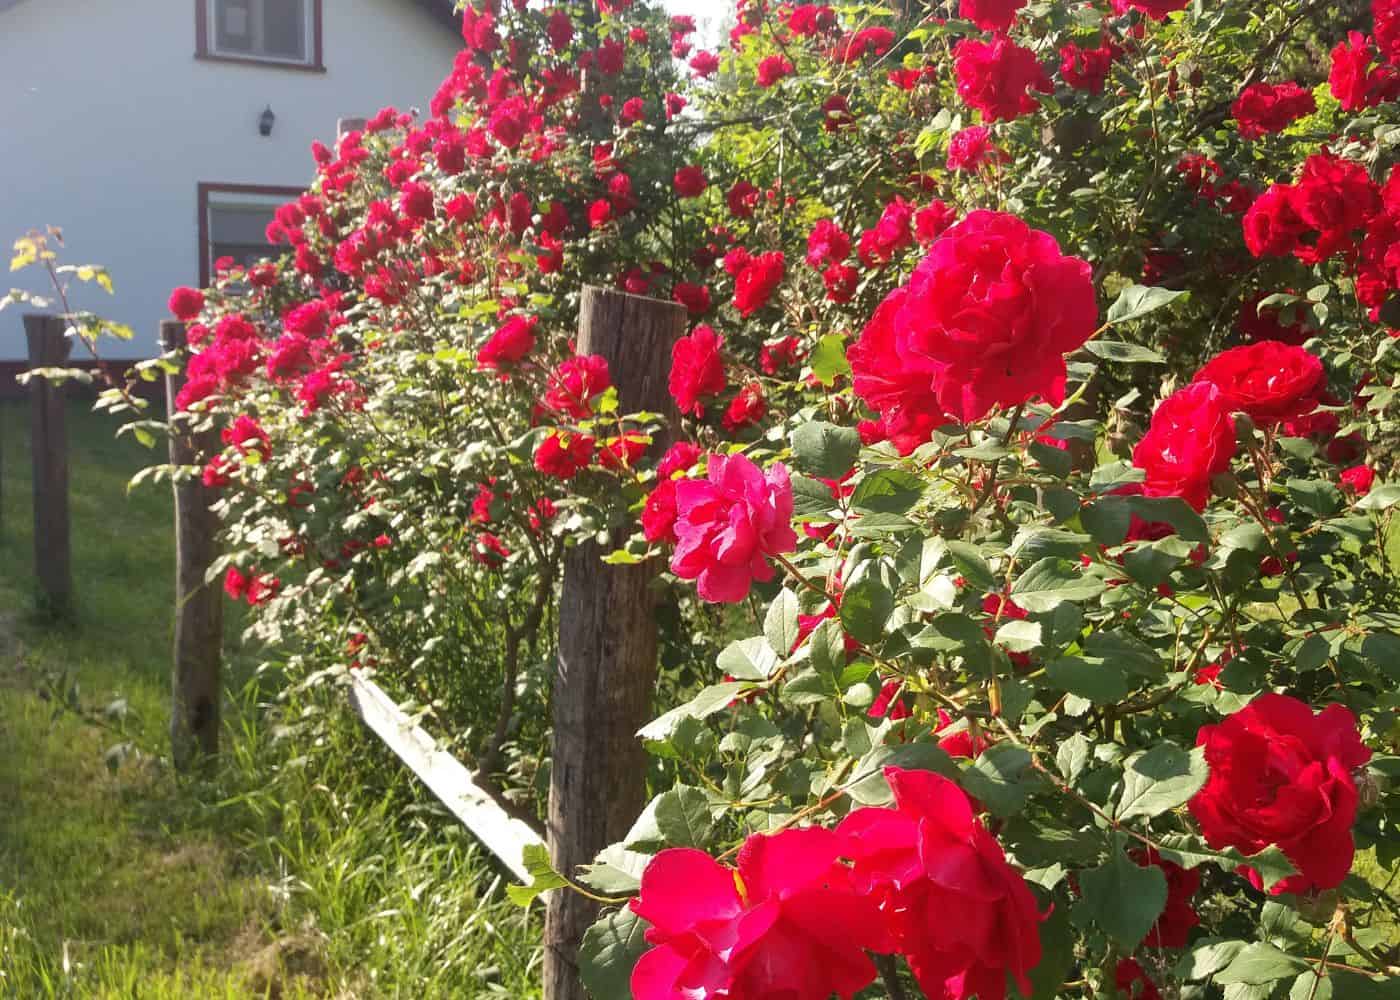 Fence covered in red roses